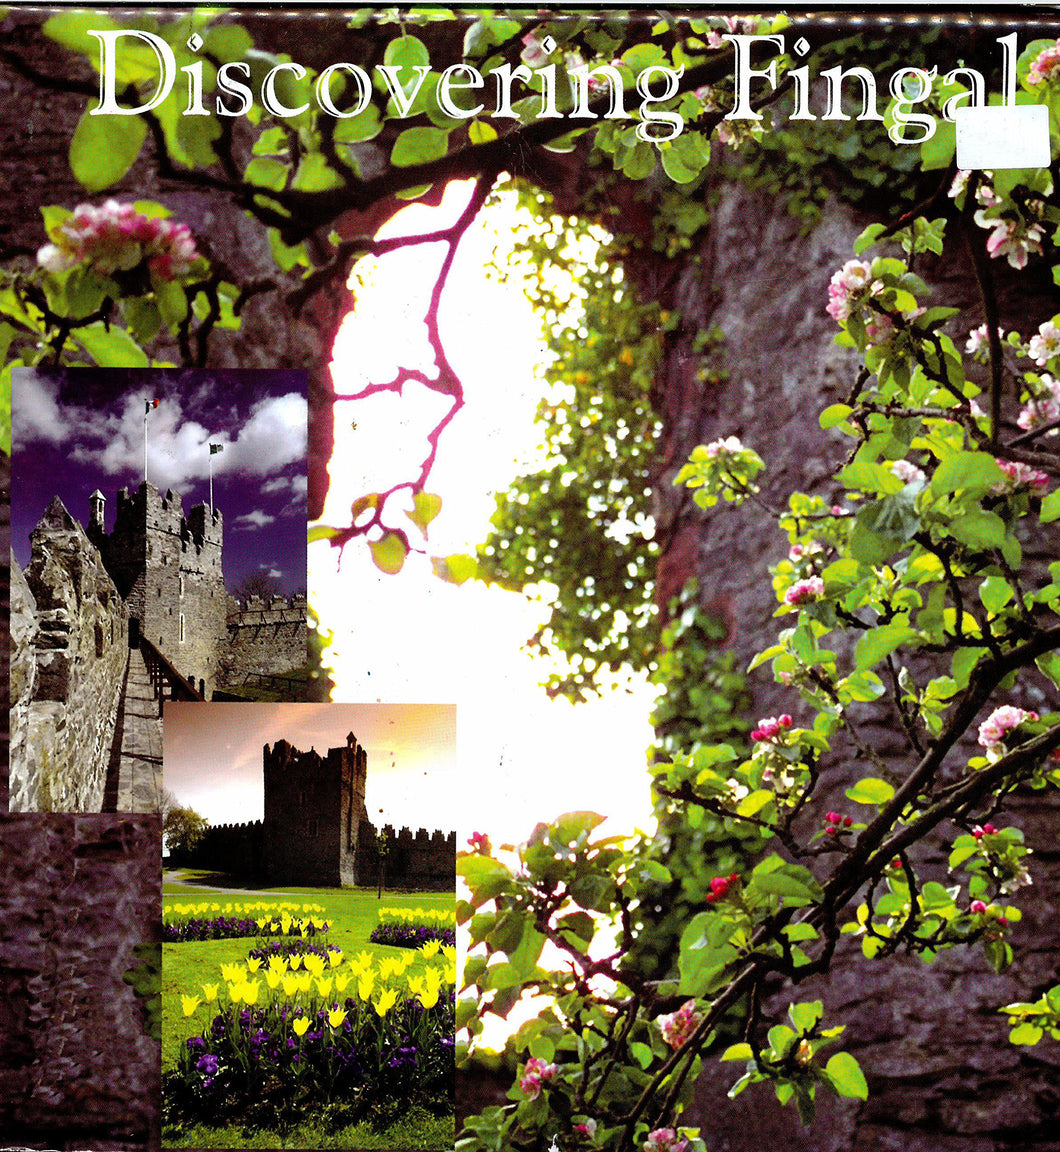 Discovering Fingal: A Photographic Tour, Volume 2